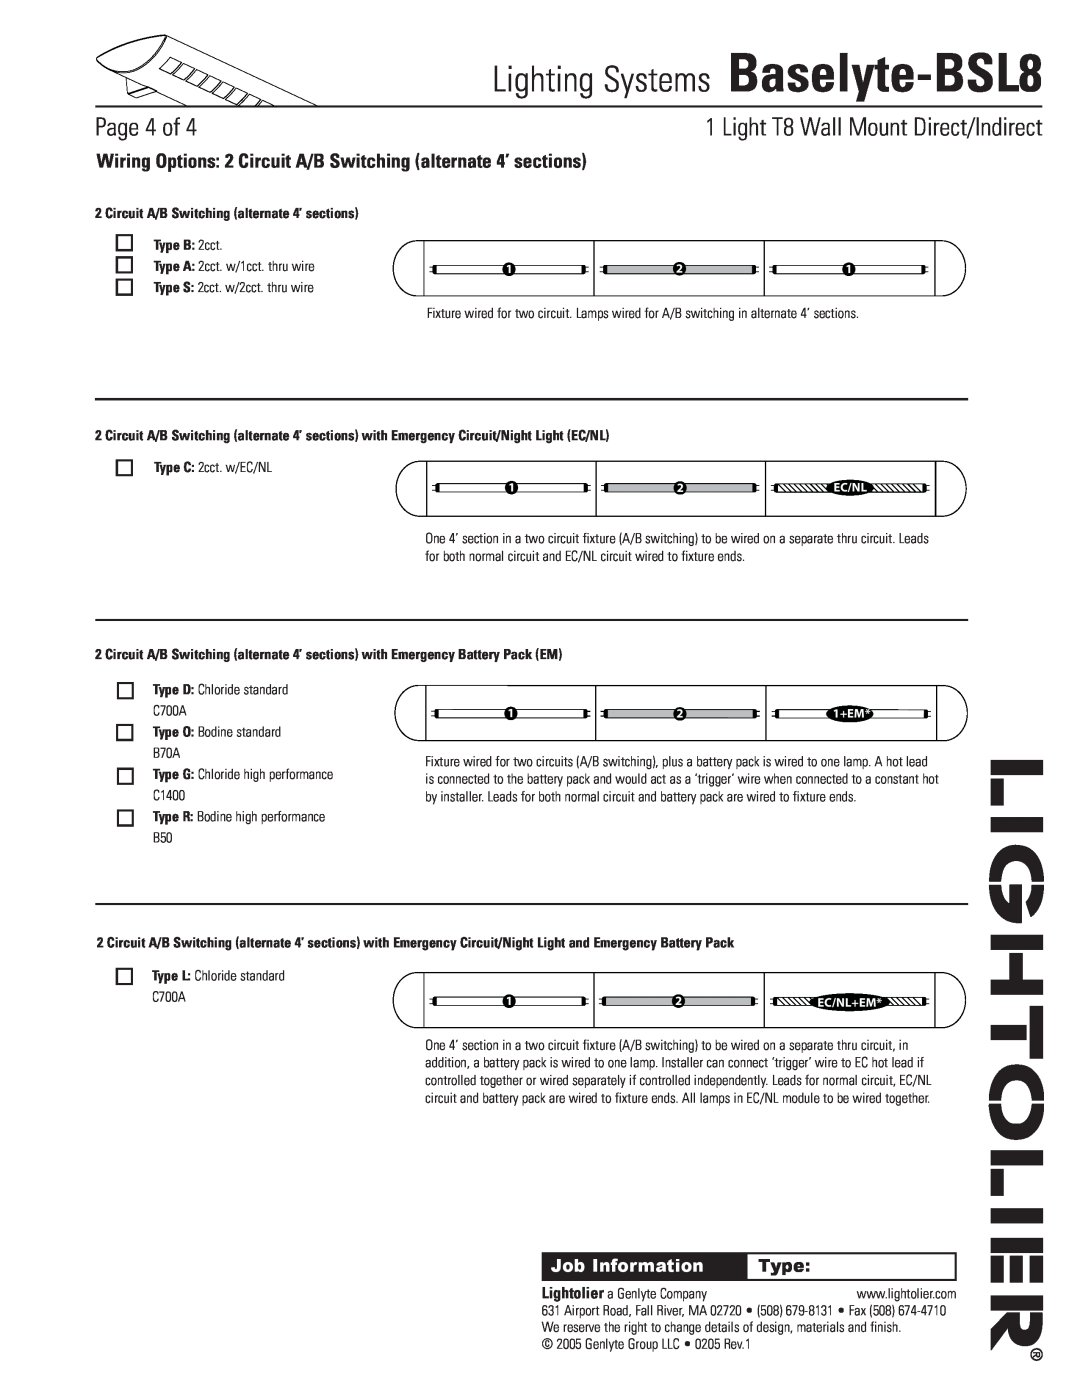 Lightolier Baselyte-BSL8 Circuit A/B Switching alternate 4’ sections, Type B 2cct, Type O Bodine standard B70A, Page of 